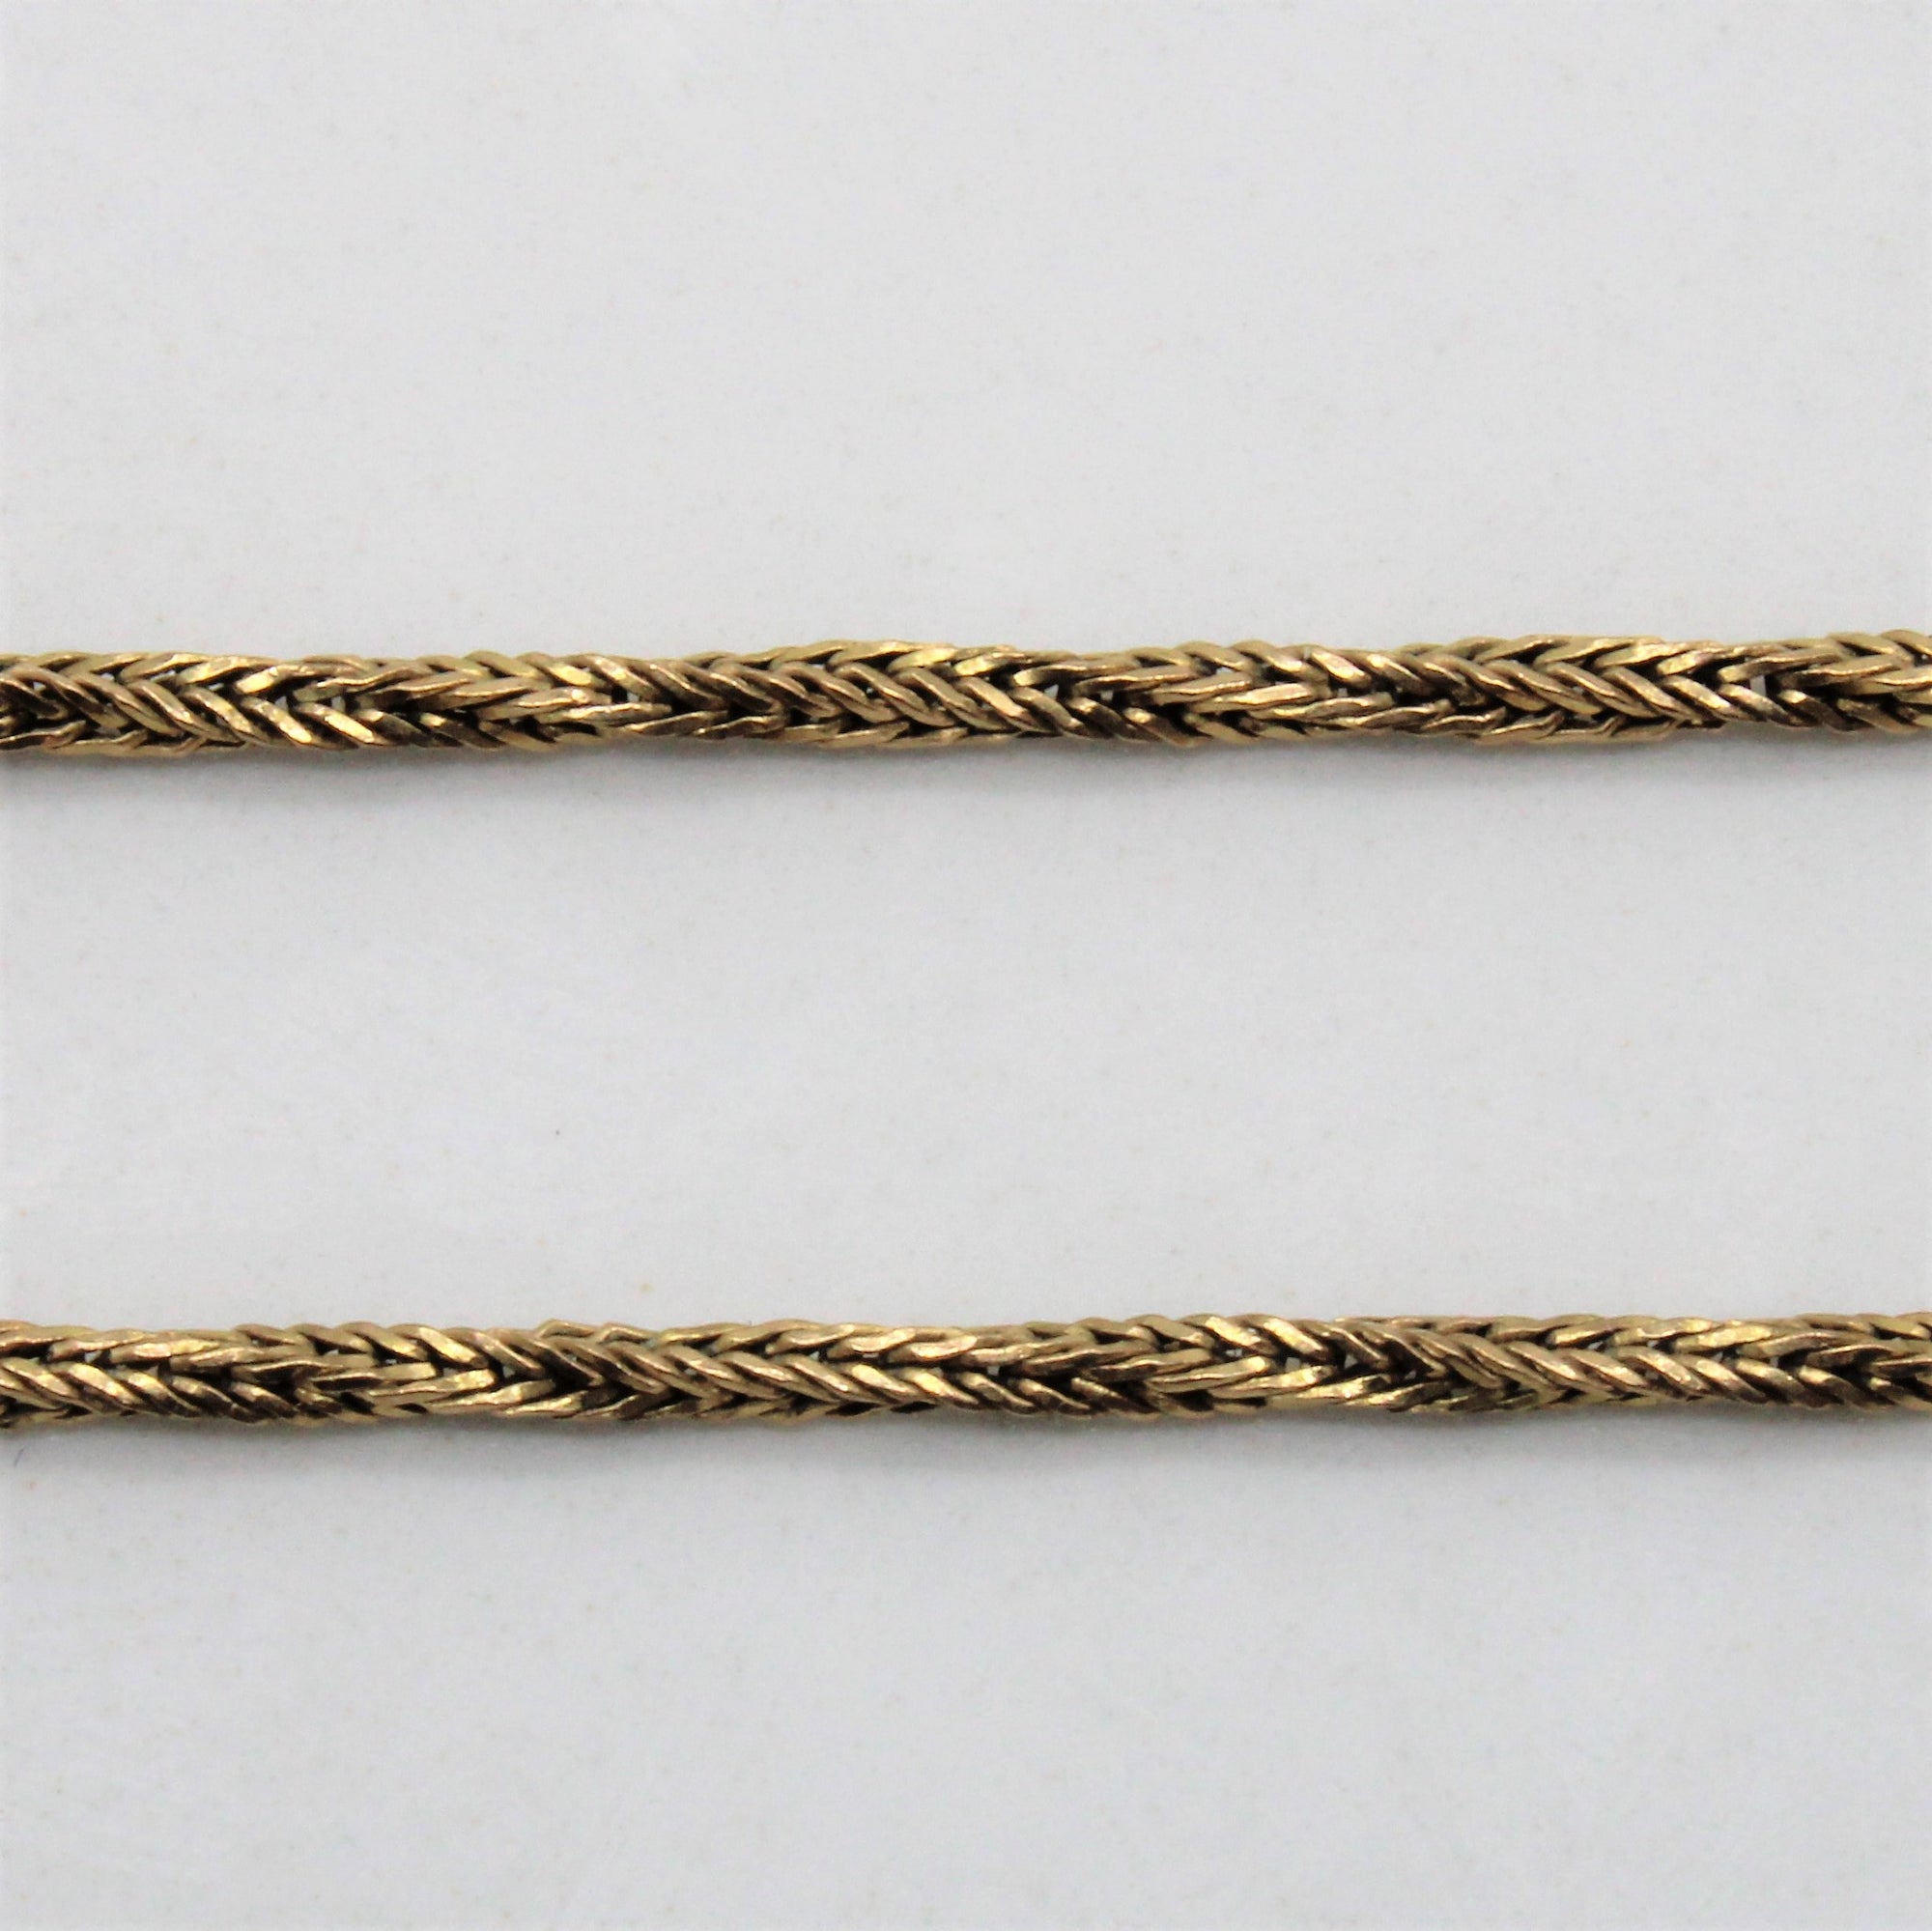 10k Yellow Gold Twisted Wheat Chain | 20